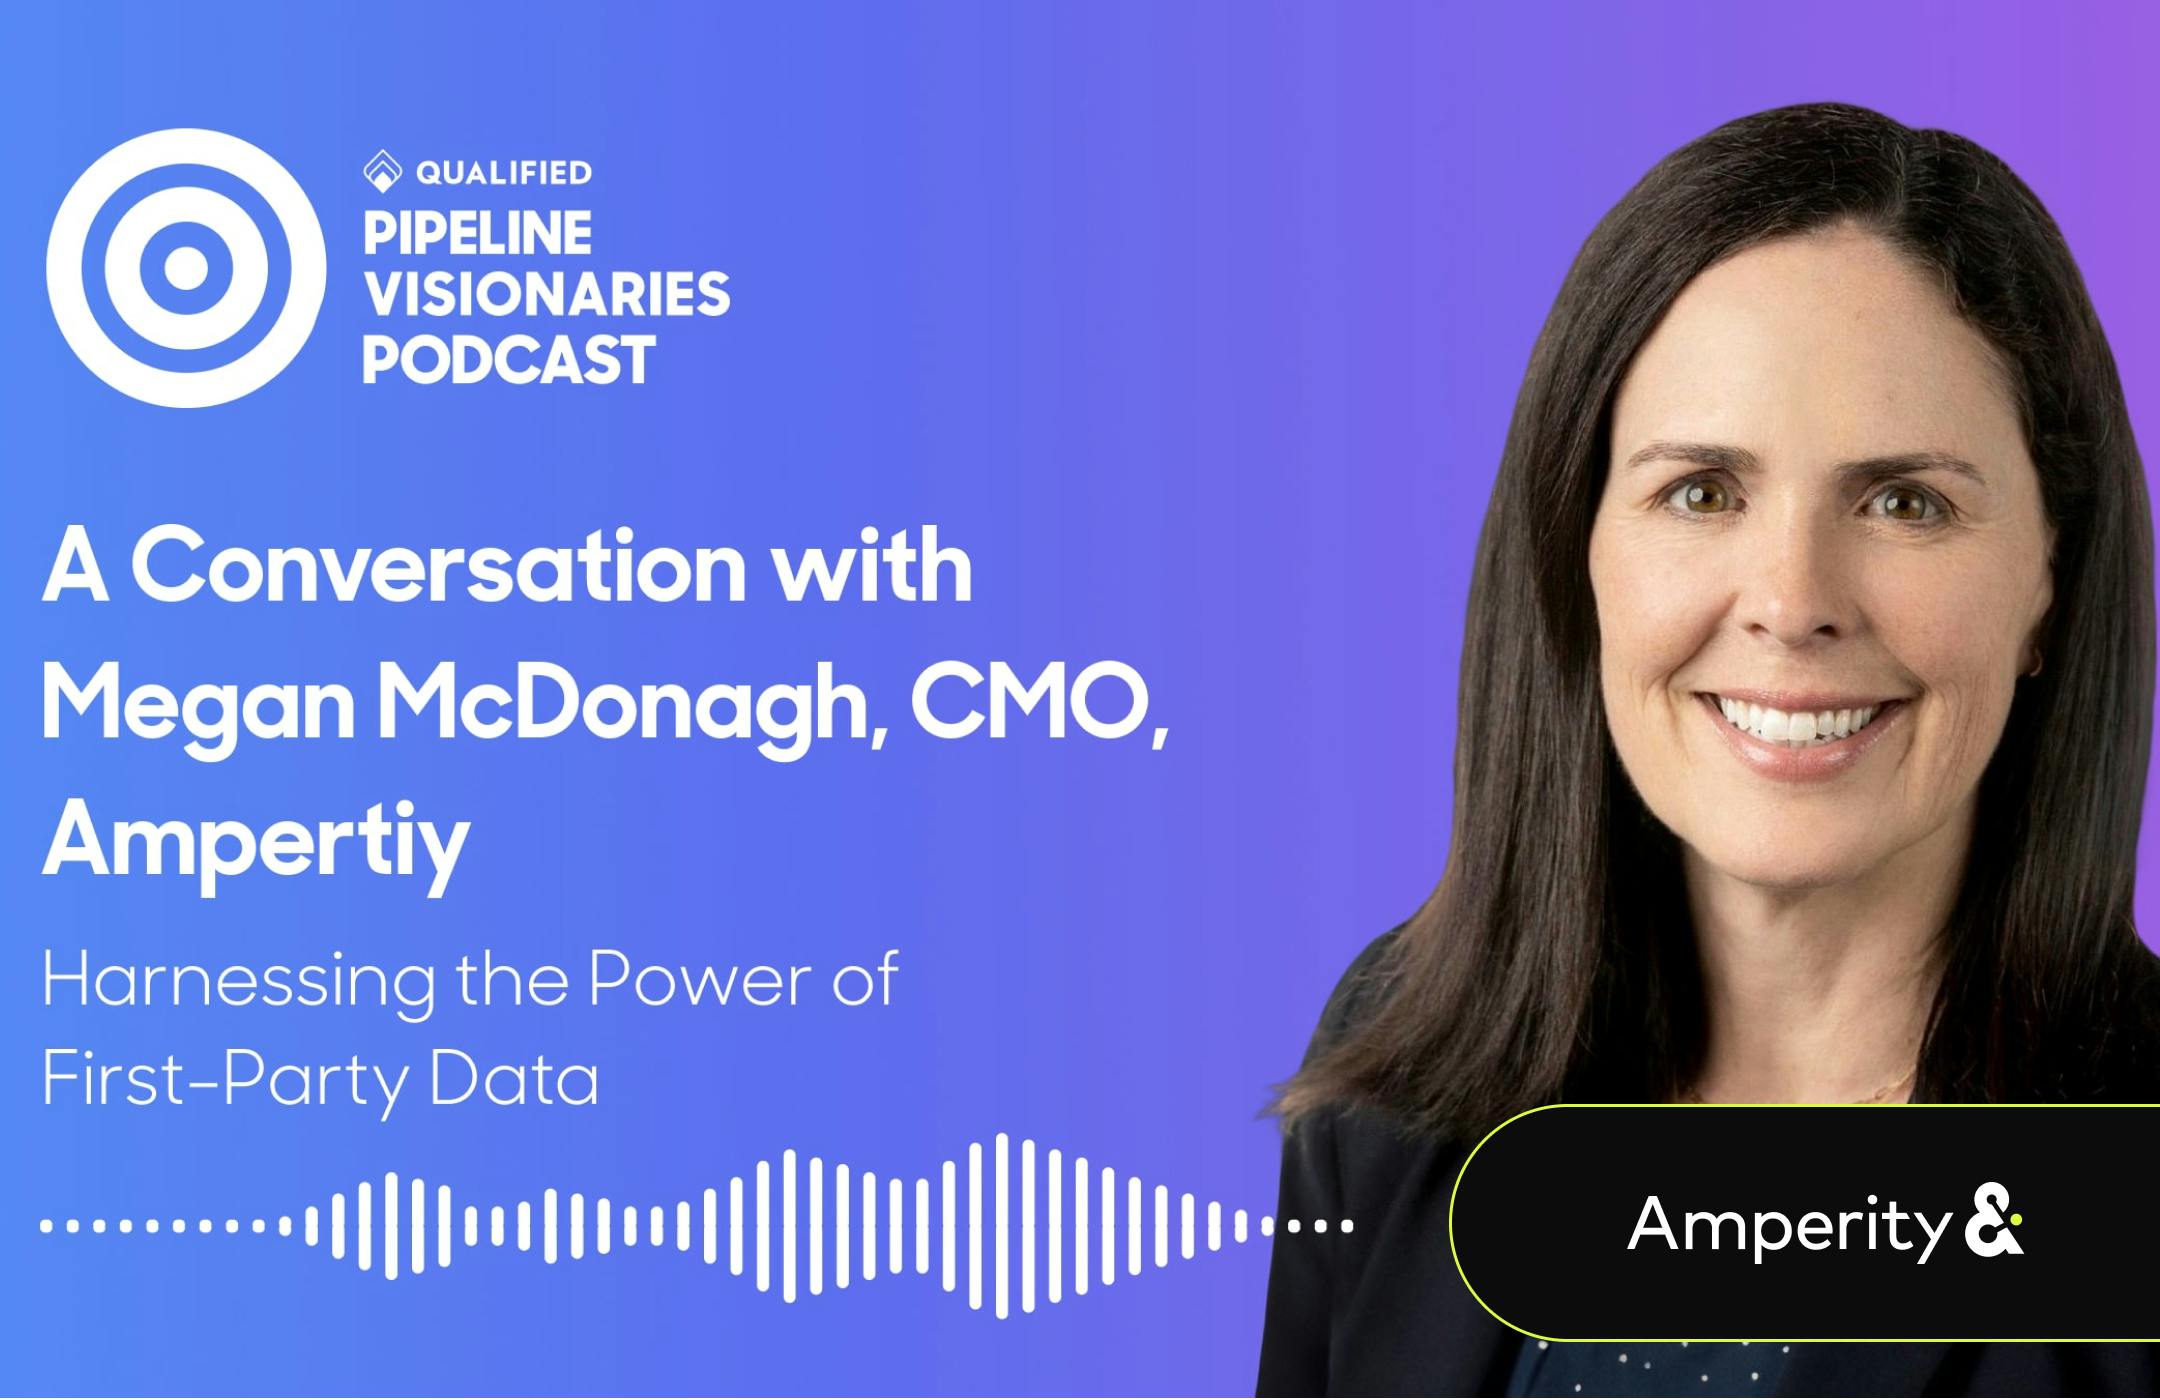 Hero image of Megan McDonagh, CMO of Amperity on the Pipeline Visionaries podcast.